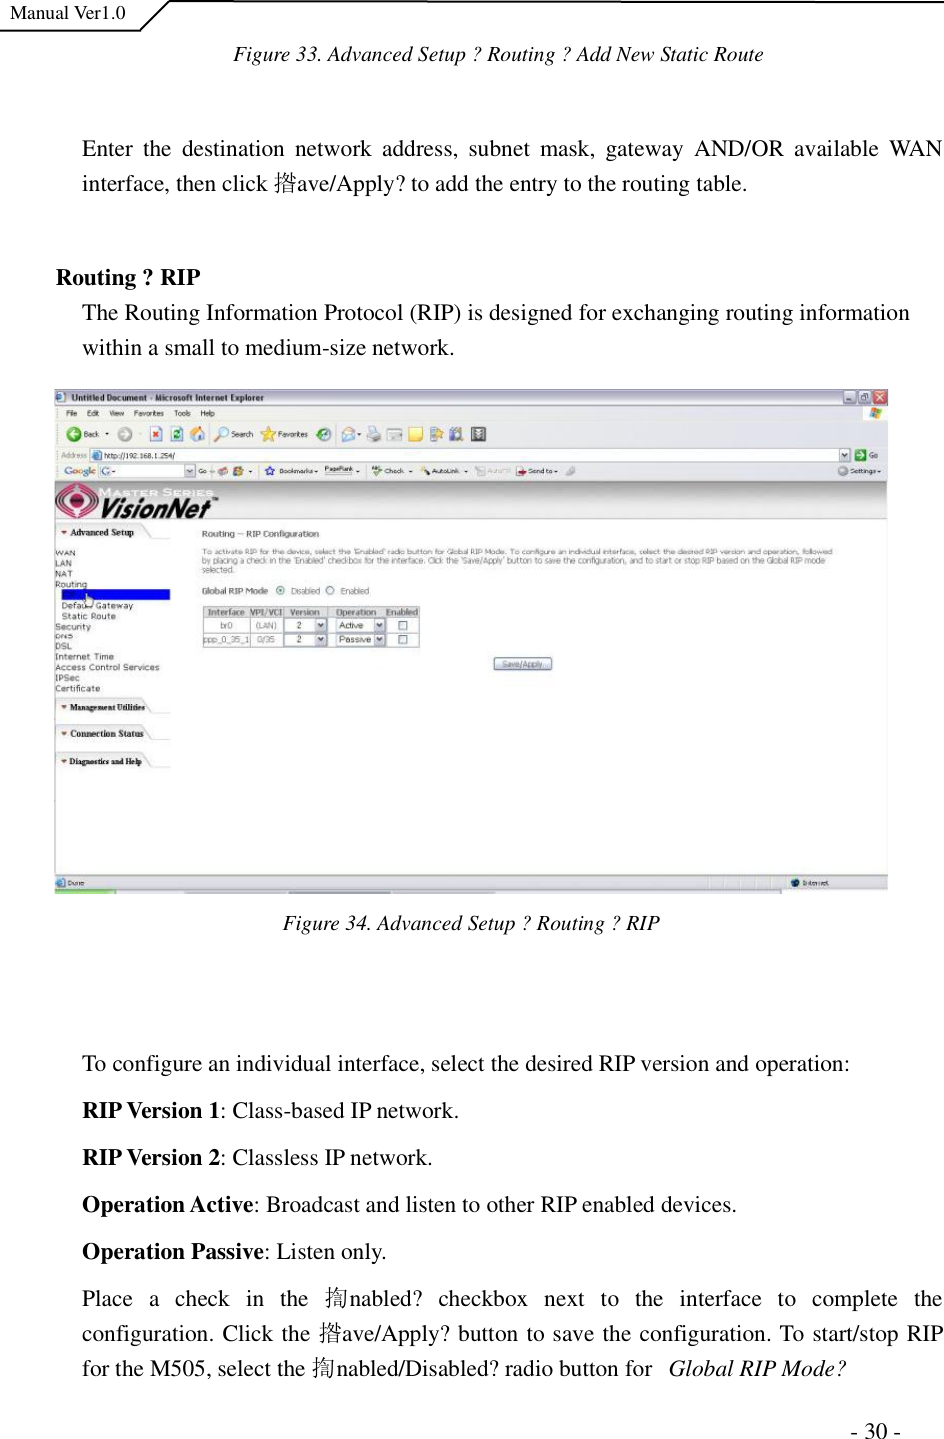  Manual Ver1.0 Figure 33. Advanced Setup ?Routing ?Add New Static RouteEnter the destination network address, subnet mask, gateway AND/OR available WAN interface, then click 揝ave/Apply?to add the entry to the routing table. Routing ?RIP The Routing Information Protocol (RIP) is designed for exchanging routing information within a small to medium-size network.  Figure 34. Advanced Setup ?Routing ?RIPTo configure an individual interface, select the desired RIP version and operation: RIP Version 1: Class-based IP network. RIP Version2: Classless IP network.  Operation Active: Broadcast and listen to other RIP enabled devices. OperationPassive: Listen only. Place a check in the  揈nabled?checkbox next to the interface to complete the configuration. Click the 揝ave/Apply?button to save the configuration. To start/stop RIP for the M505, select the 揈nabled/Disabled?radio button for   Global RIP Mode?                                                                     - 30 - 